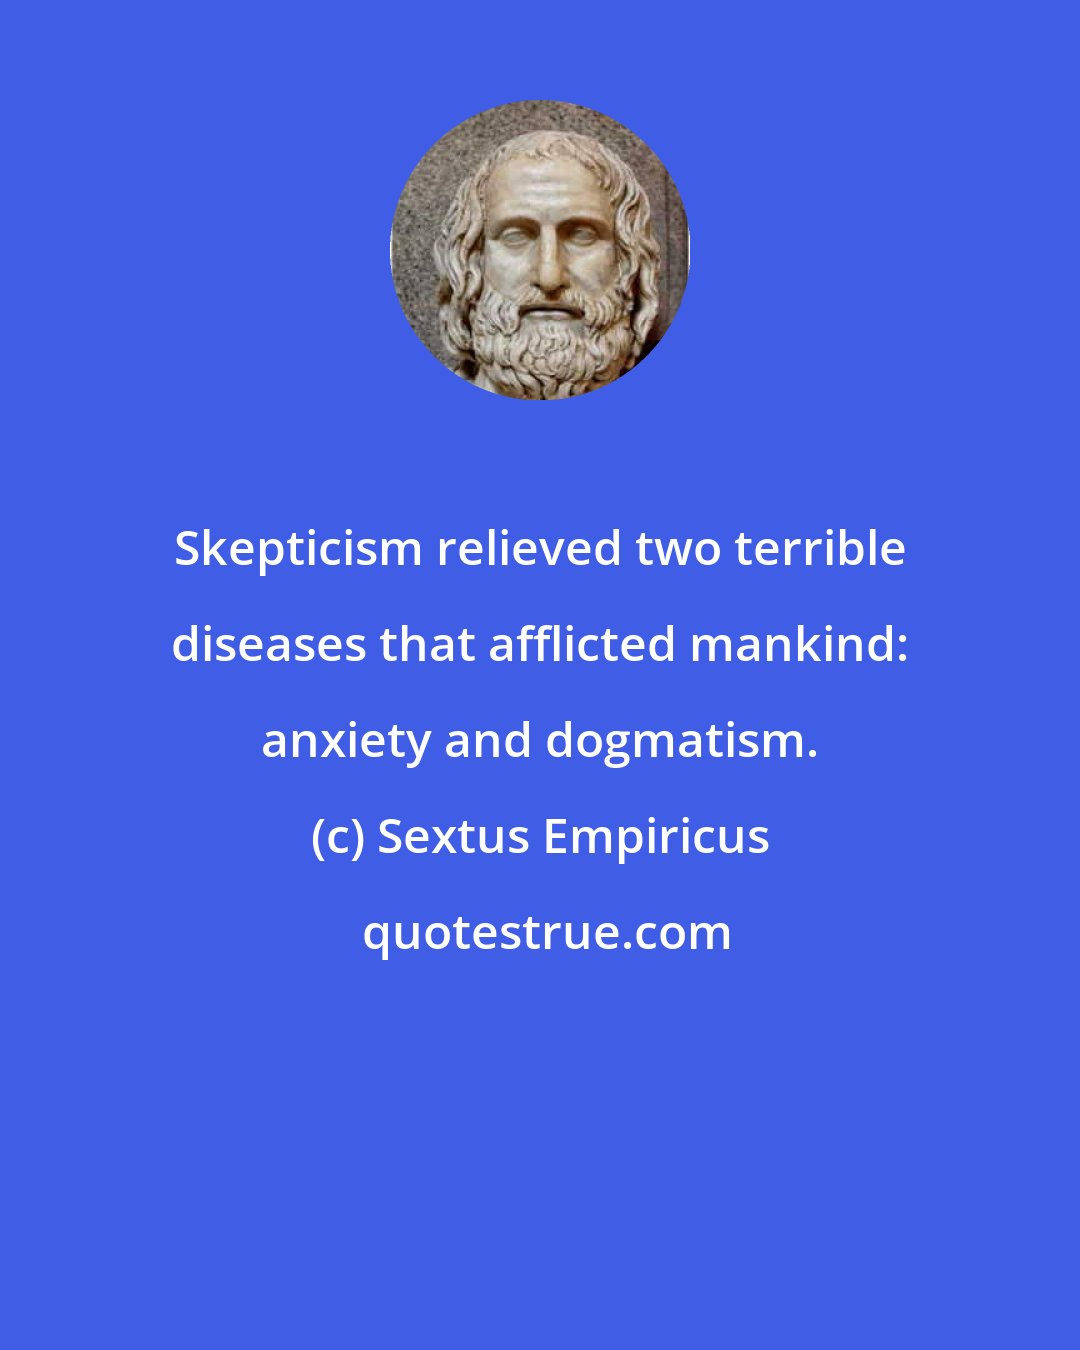 Sextus Empiricus: Skepticism relieved two terrible diseases that afflicted mankind: anxiety and dogmatism.